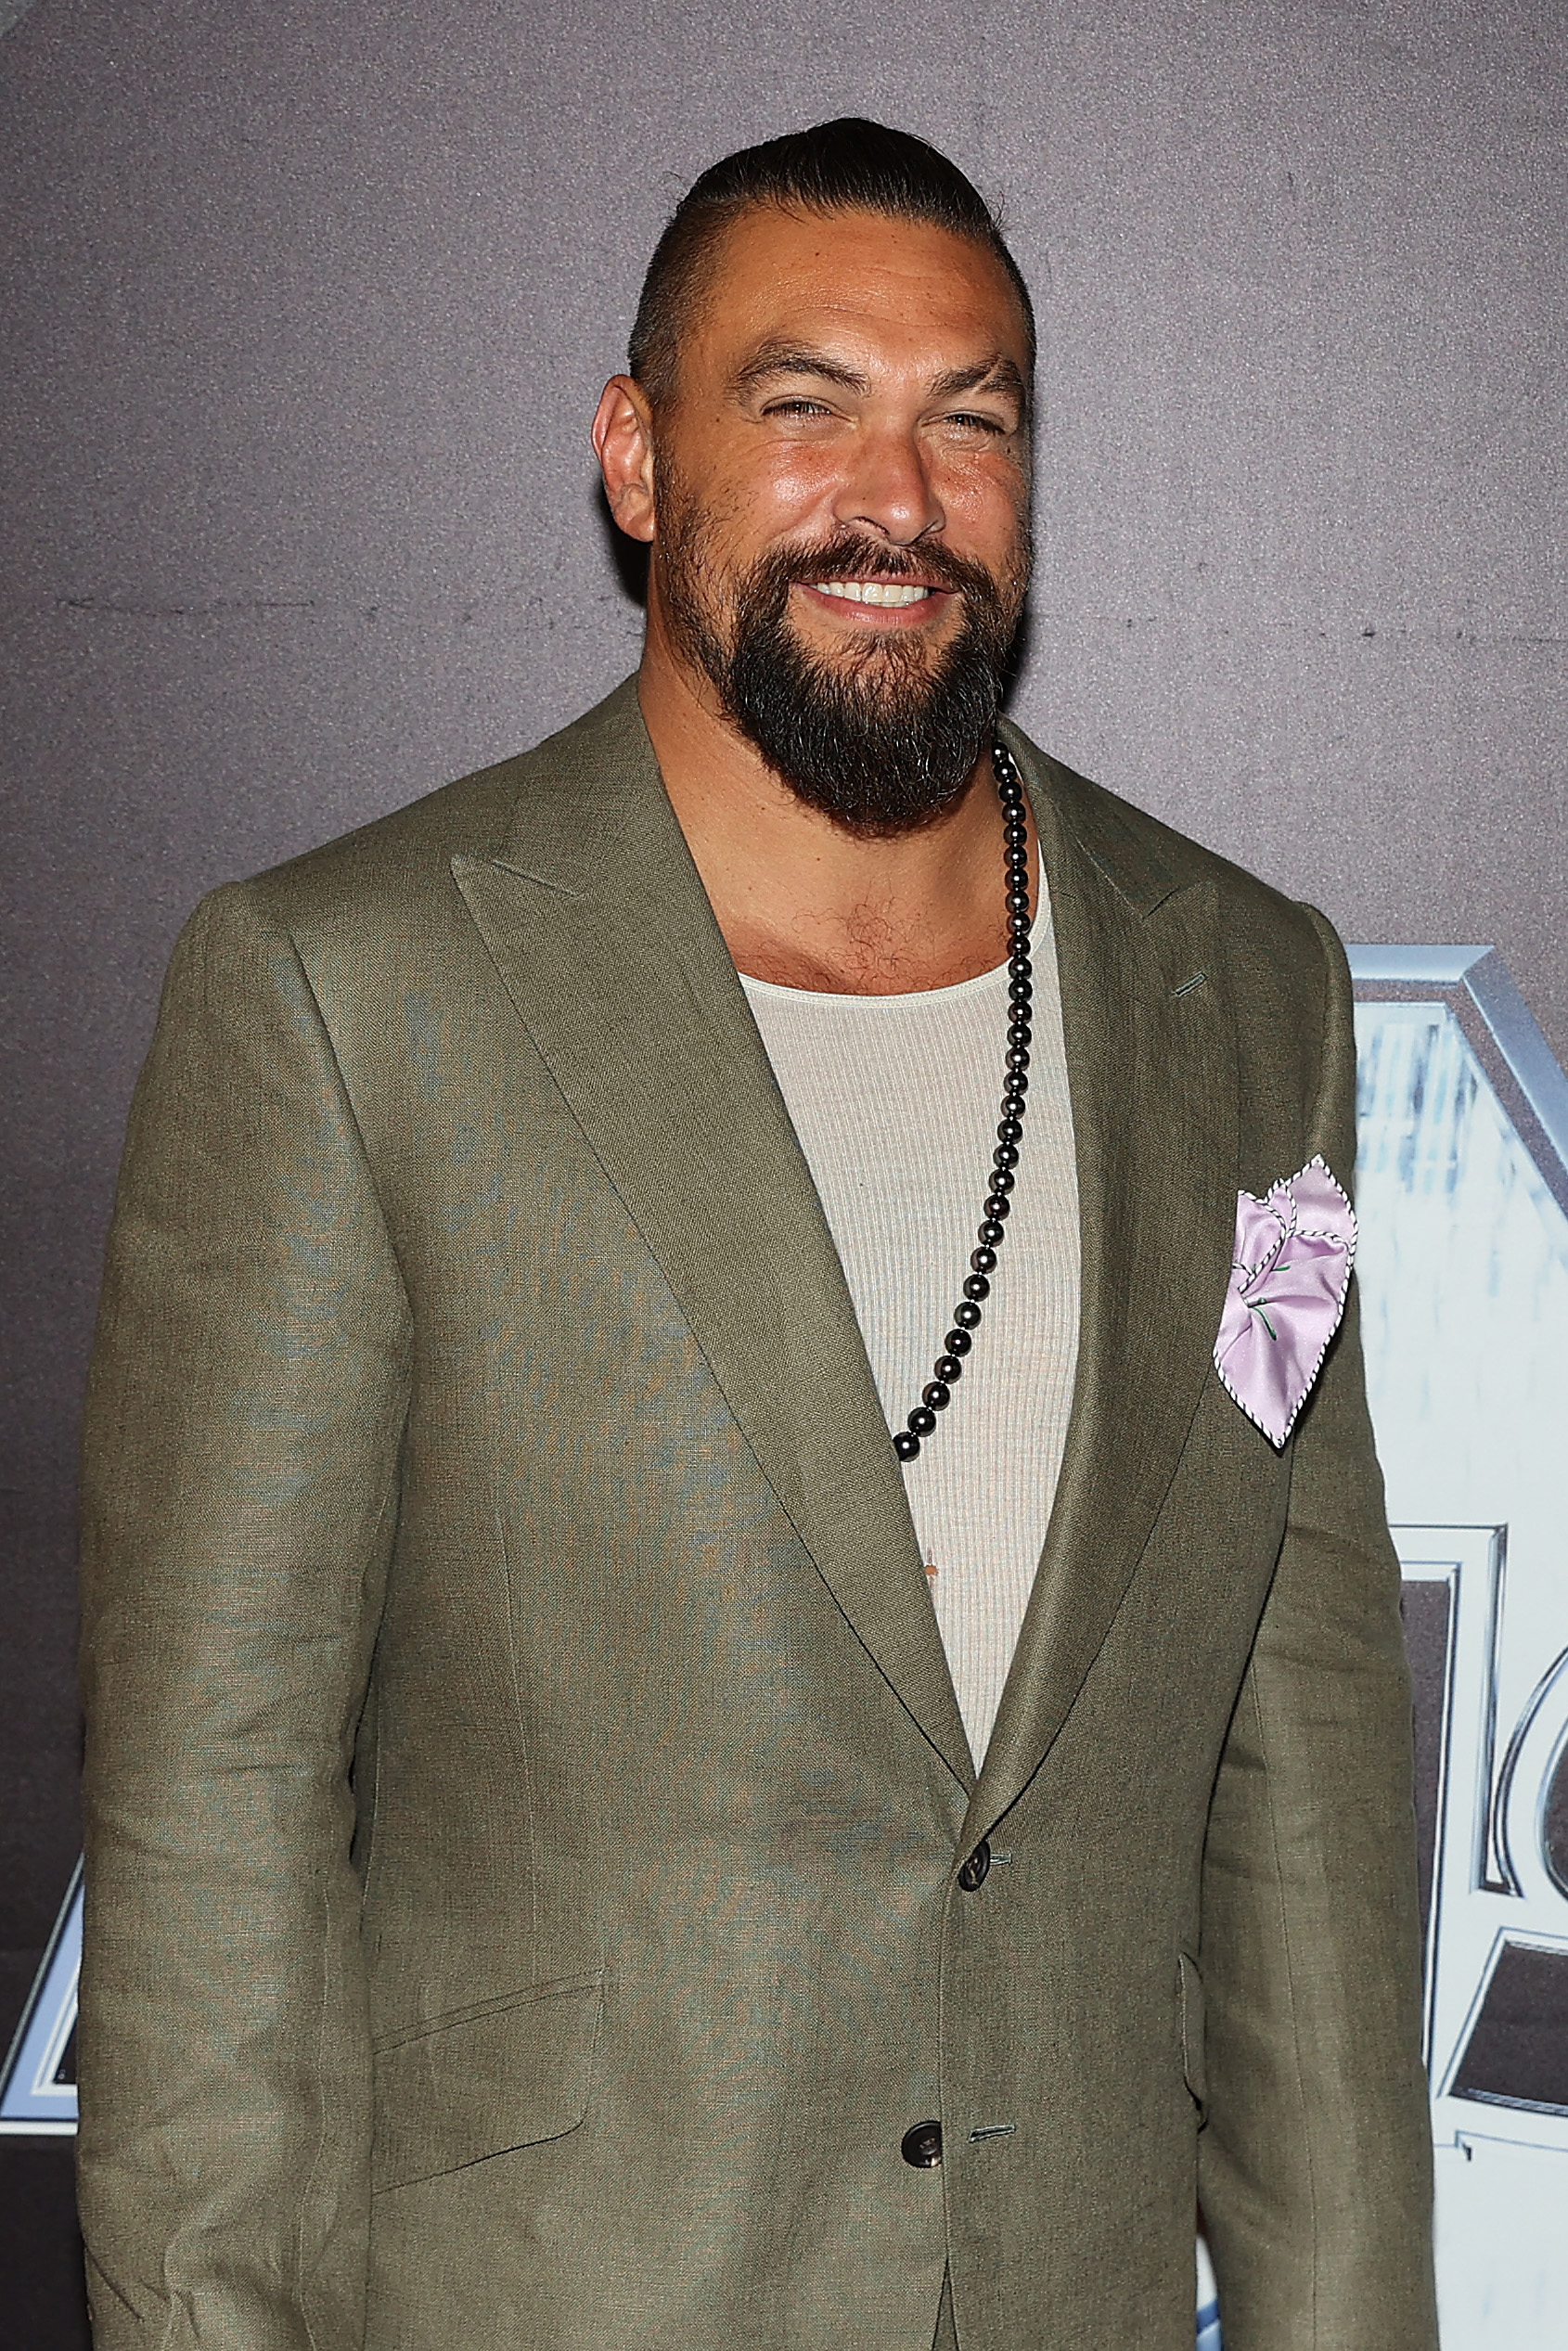 Jason Momoa poses for a photo at an event